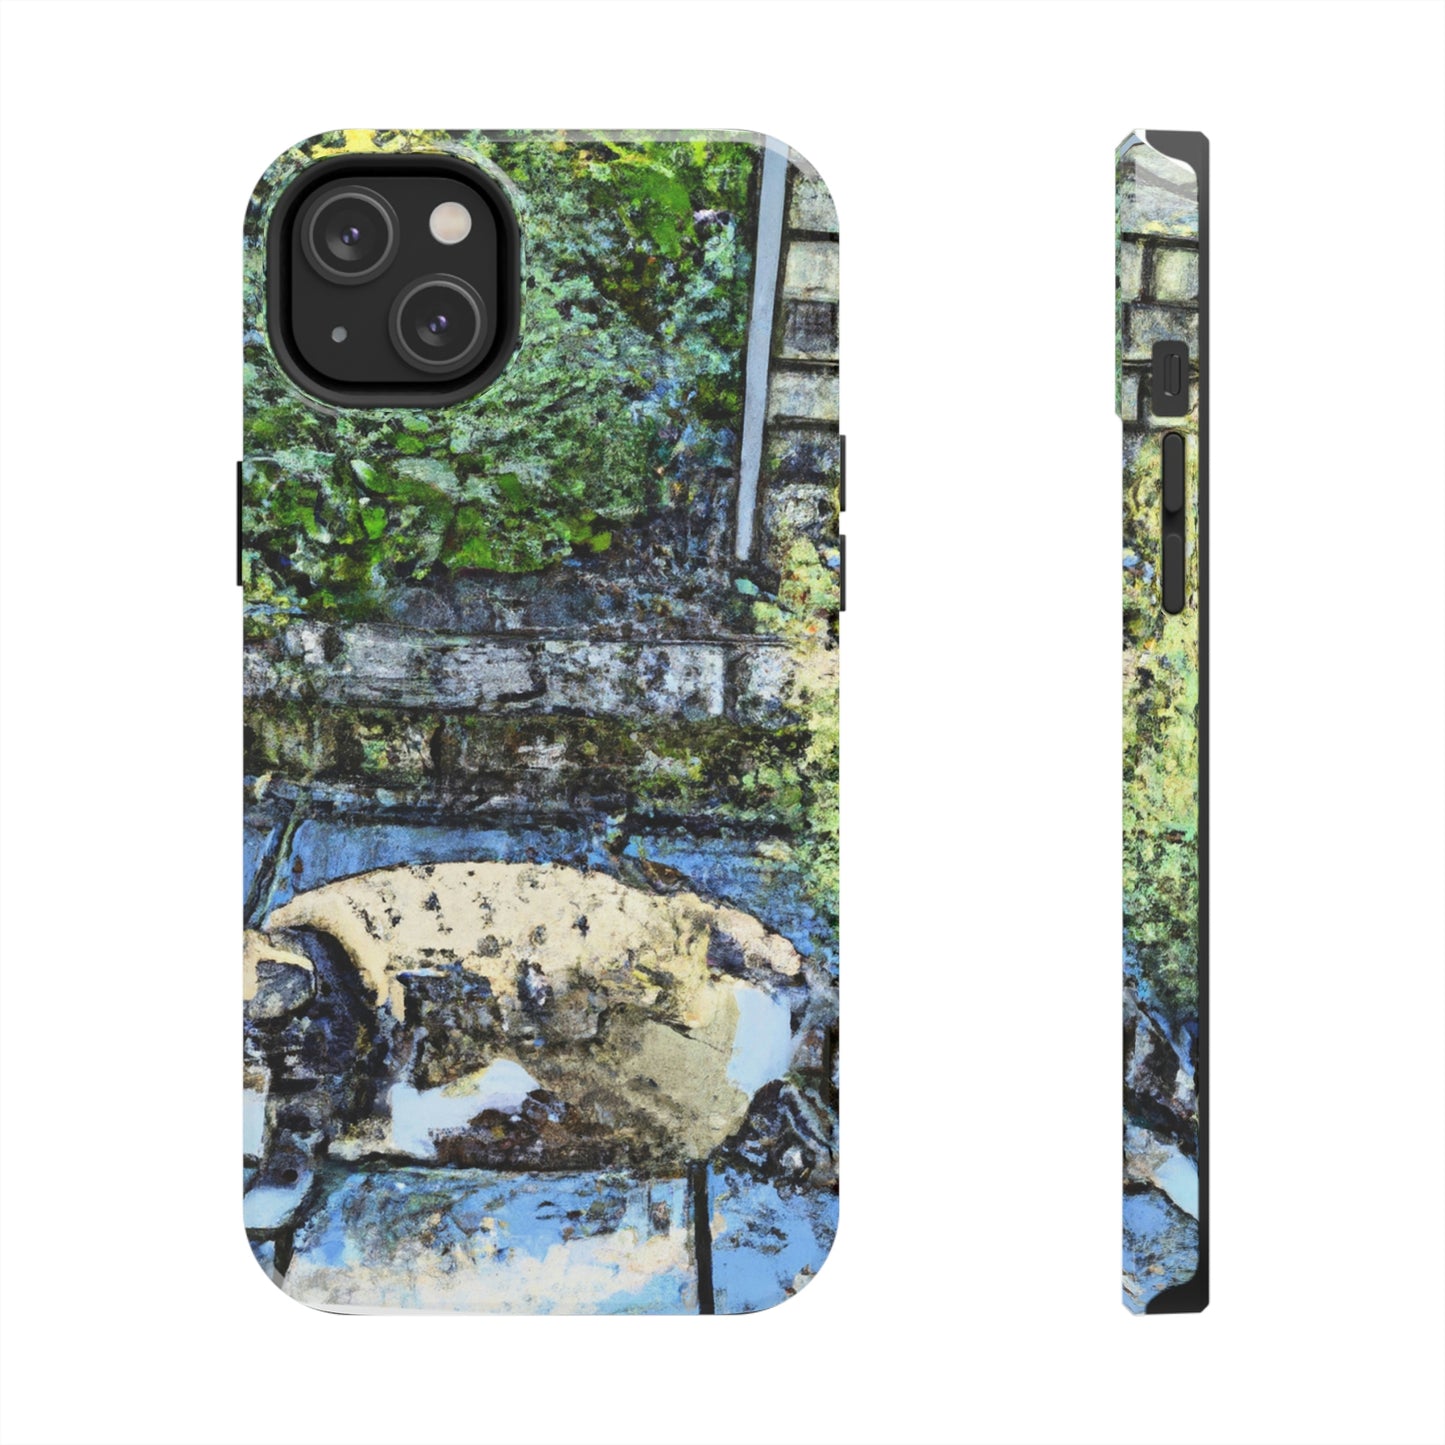 "A Cat's Life of Luxury" - The Alien Tough Phone Cases